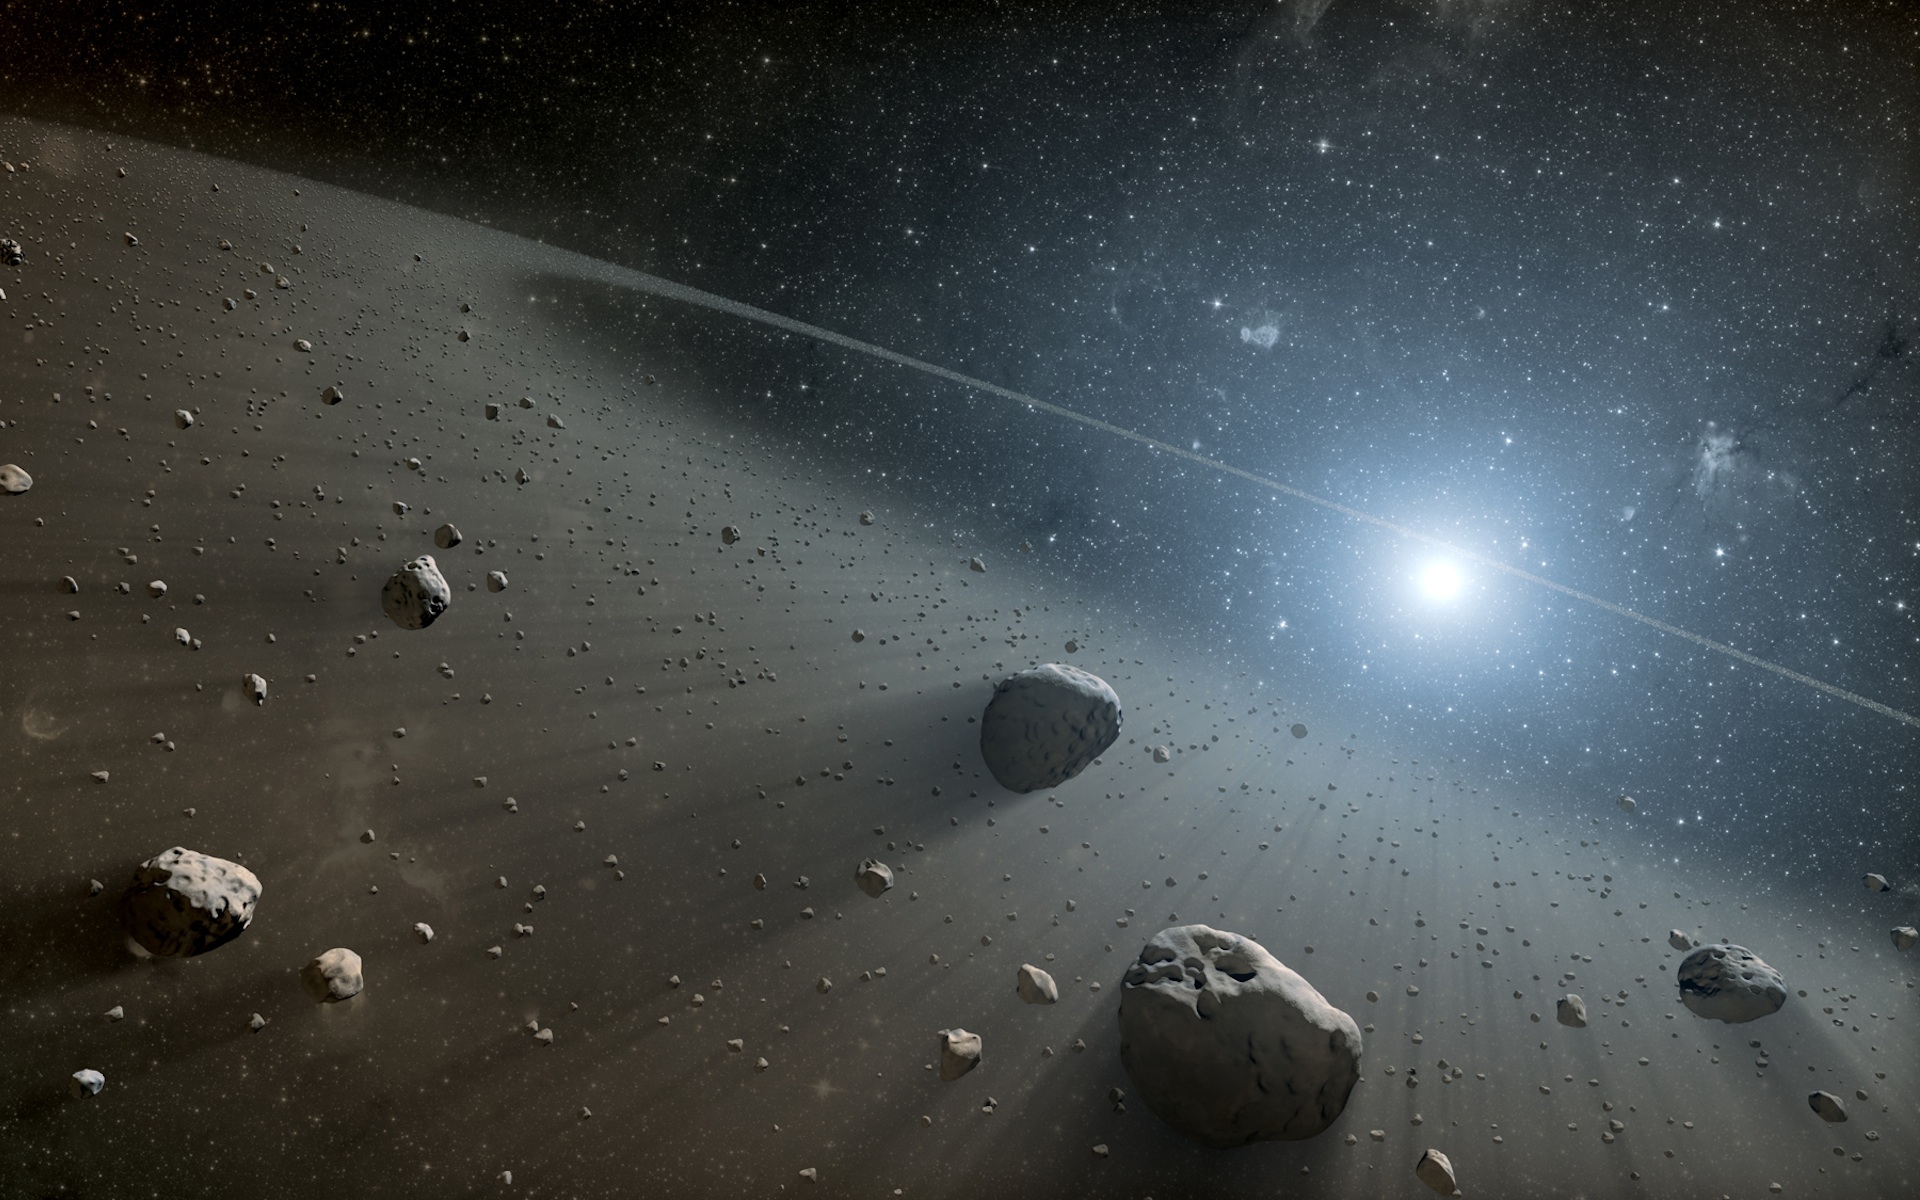 Nearby asteroid may contain elements ‘beyond the periodic table’, new study suggests Space